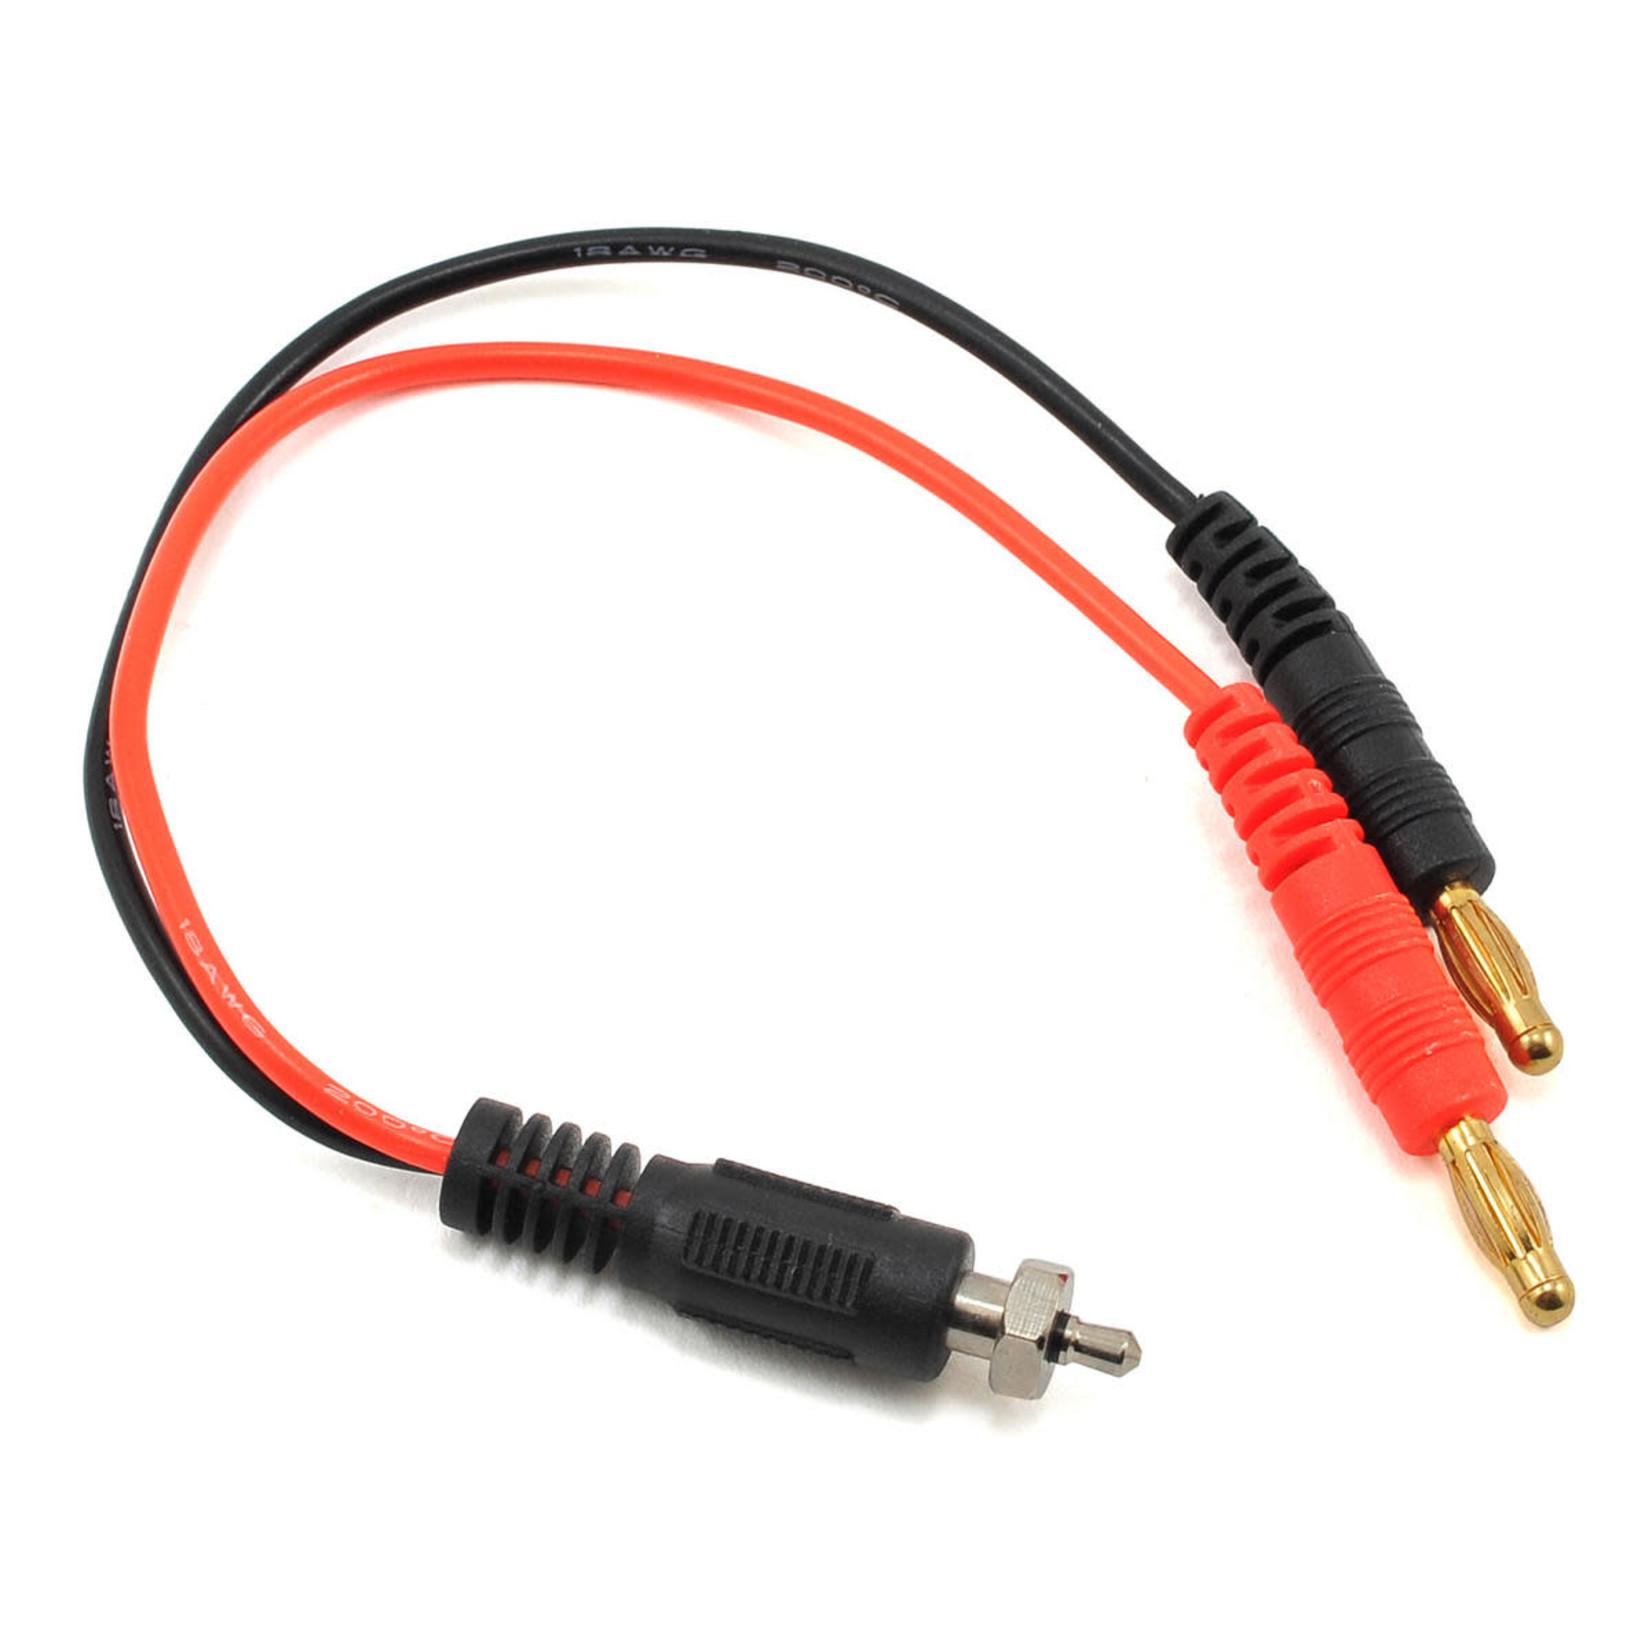 ProTek RC ProTek RC Glow Ignitor Charge Lead (Ignitor Connector to 4mm Bullet Connector) #PTK-5240